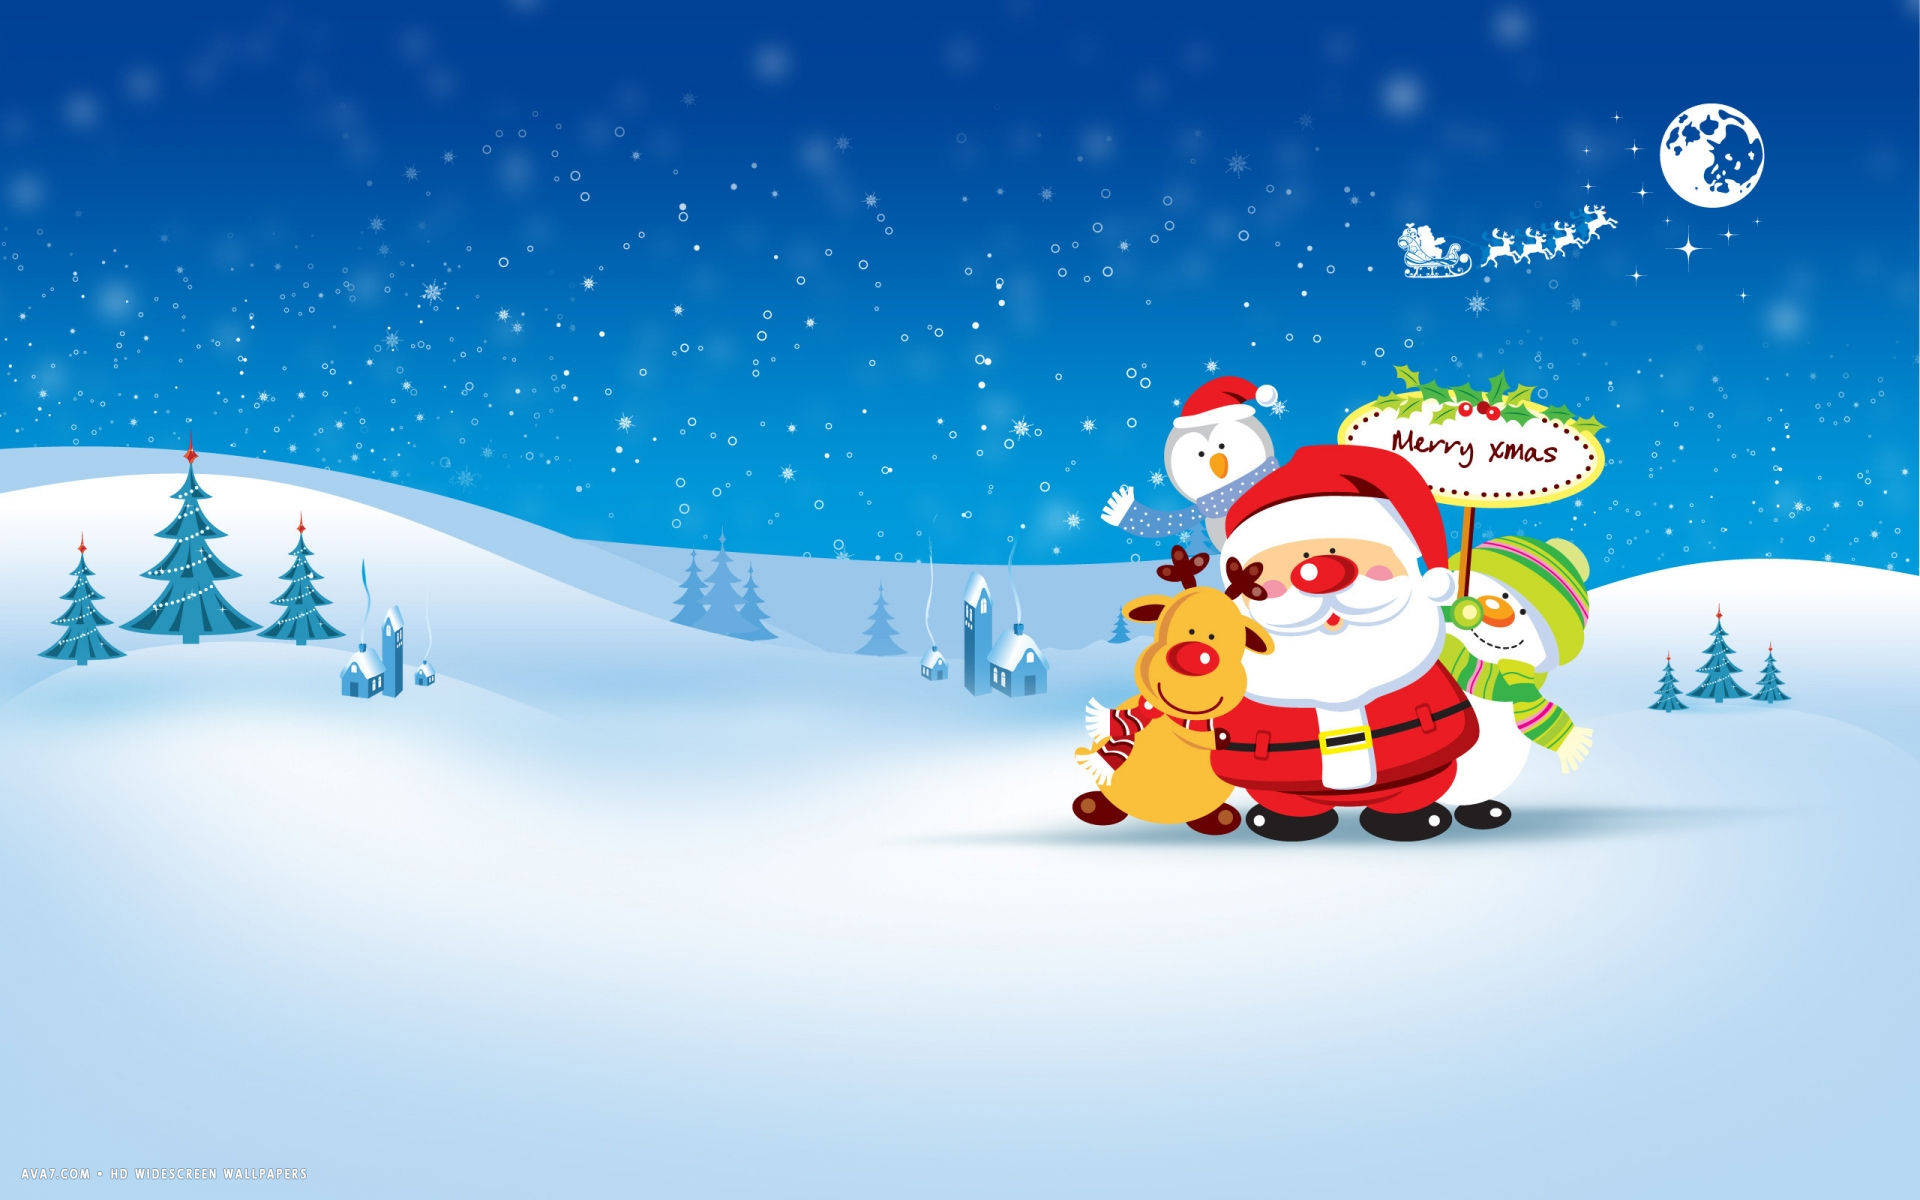 Celebrate Christmas with a wonderful widescreen wallpaper Wallpaper